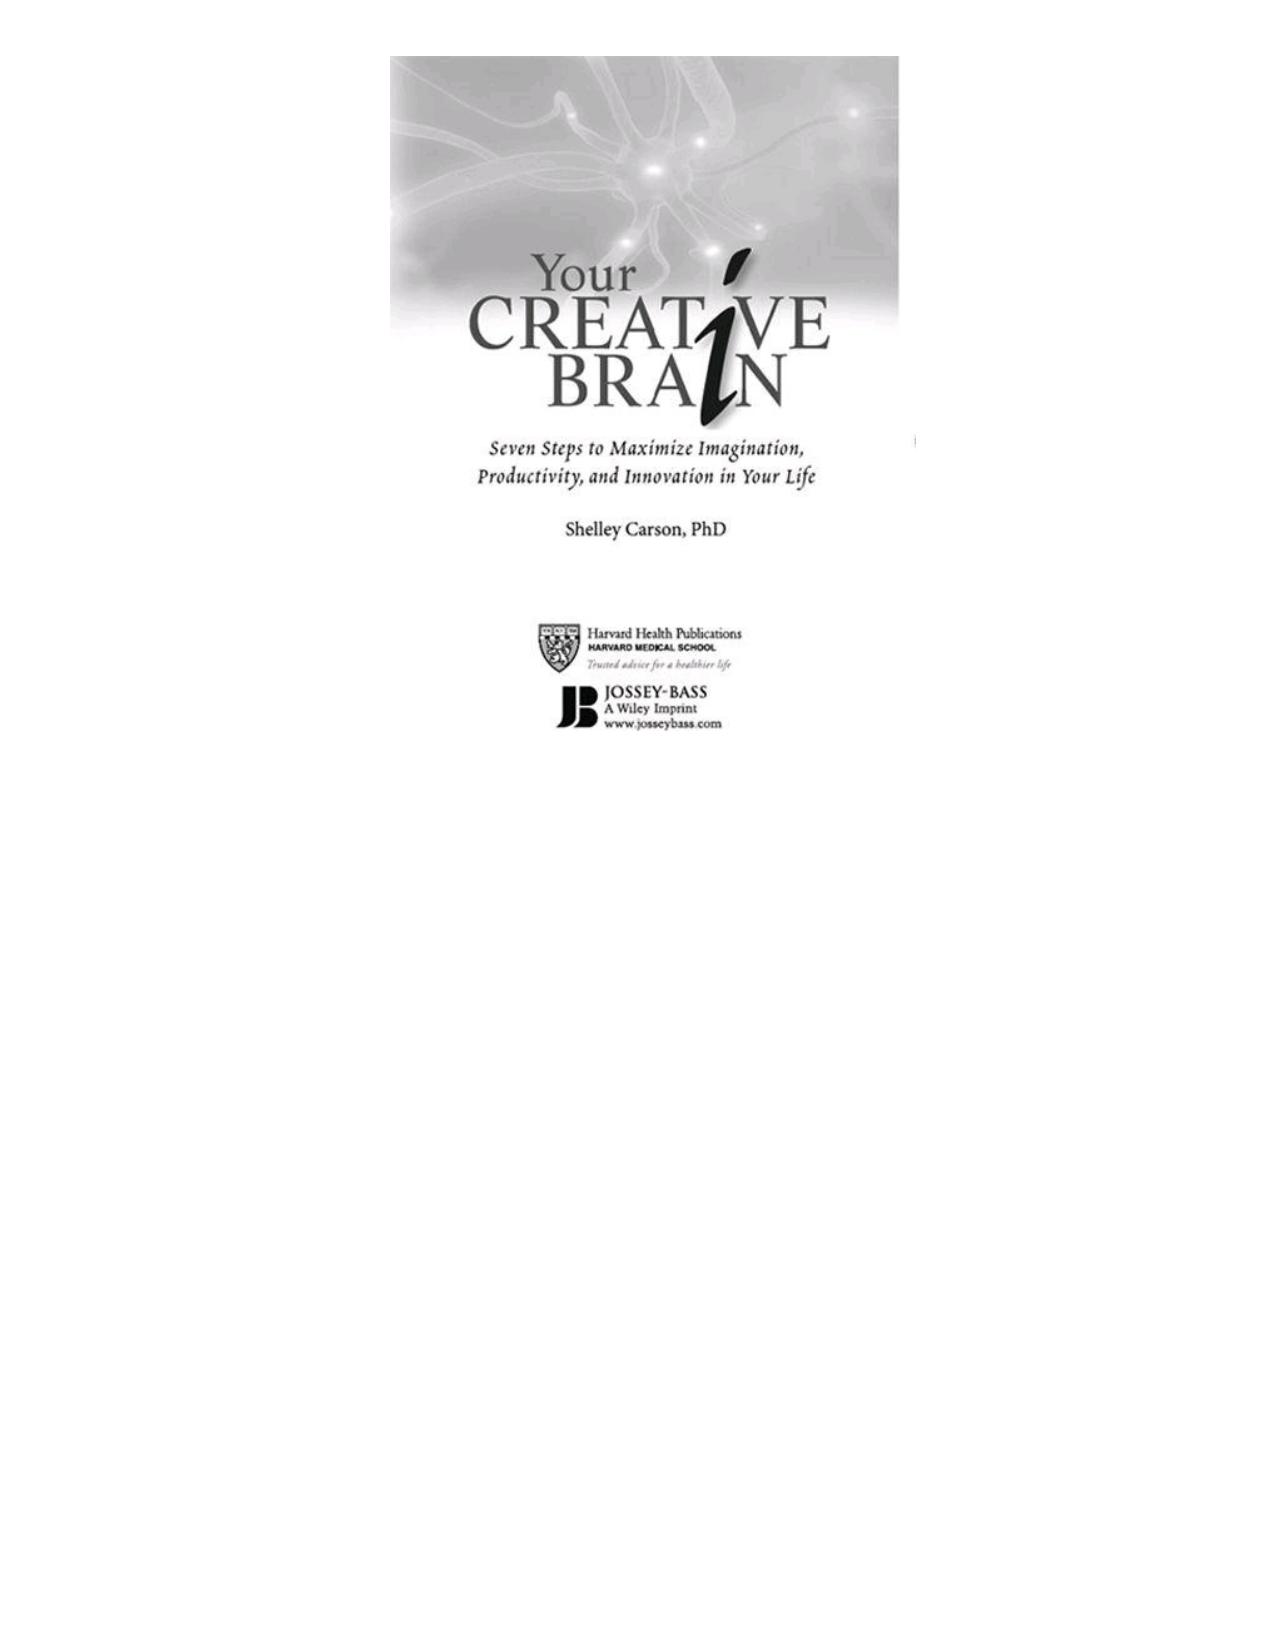 Your Creative Brain: Seven Steps to Maximize Imagination, Productivity, and Innovation in Your Life (Harvard Health Publications) by Carson Shelley